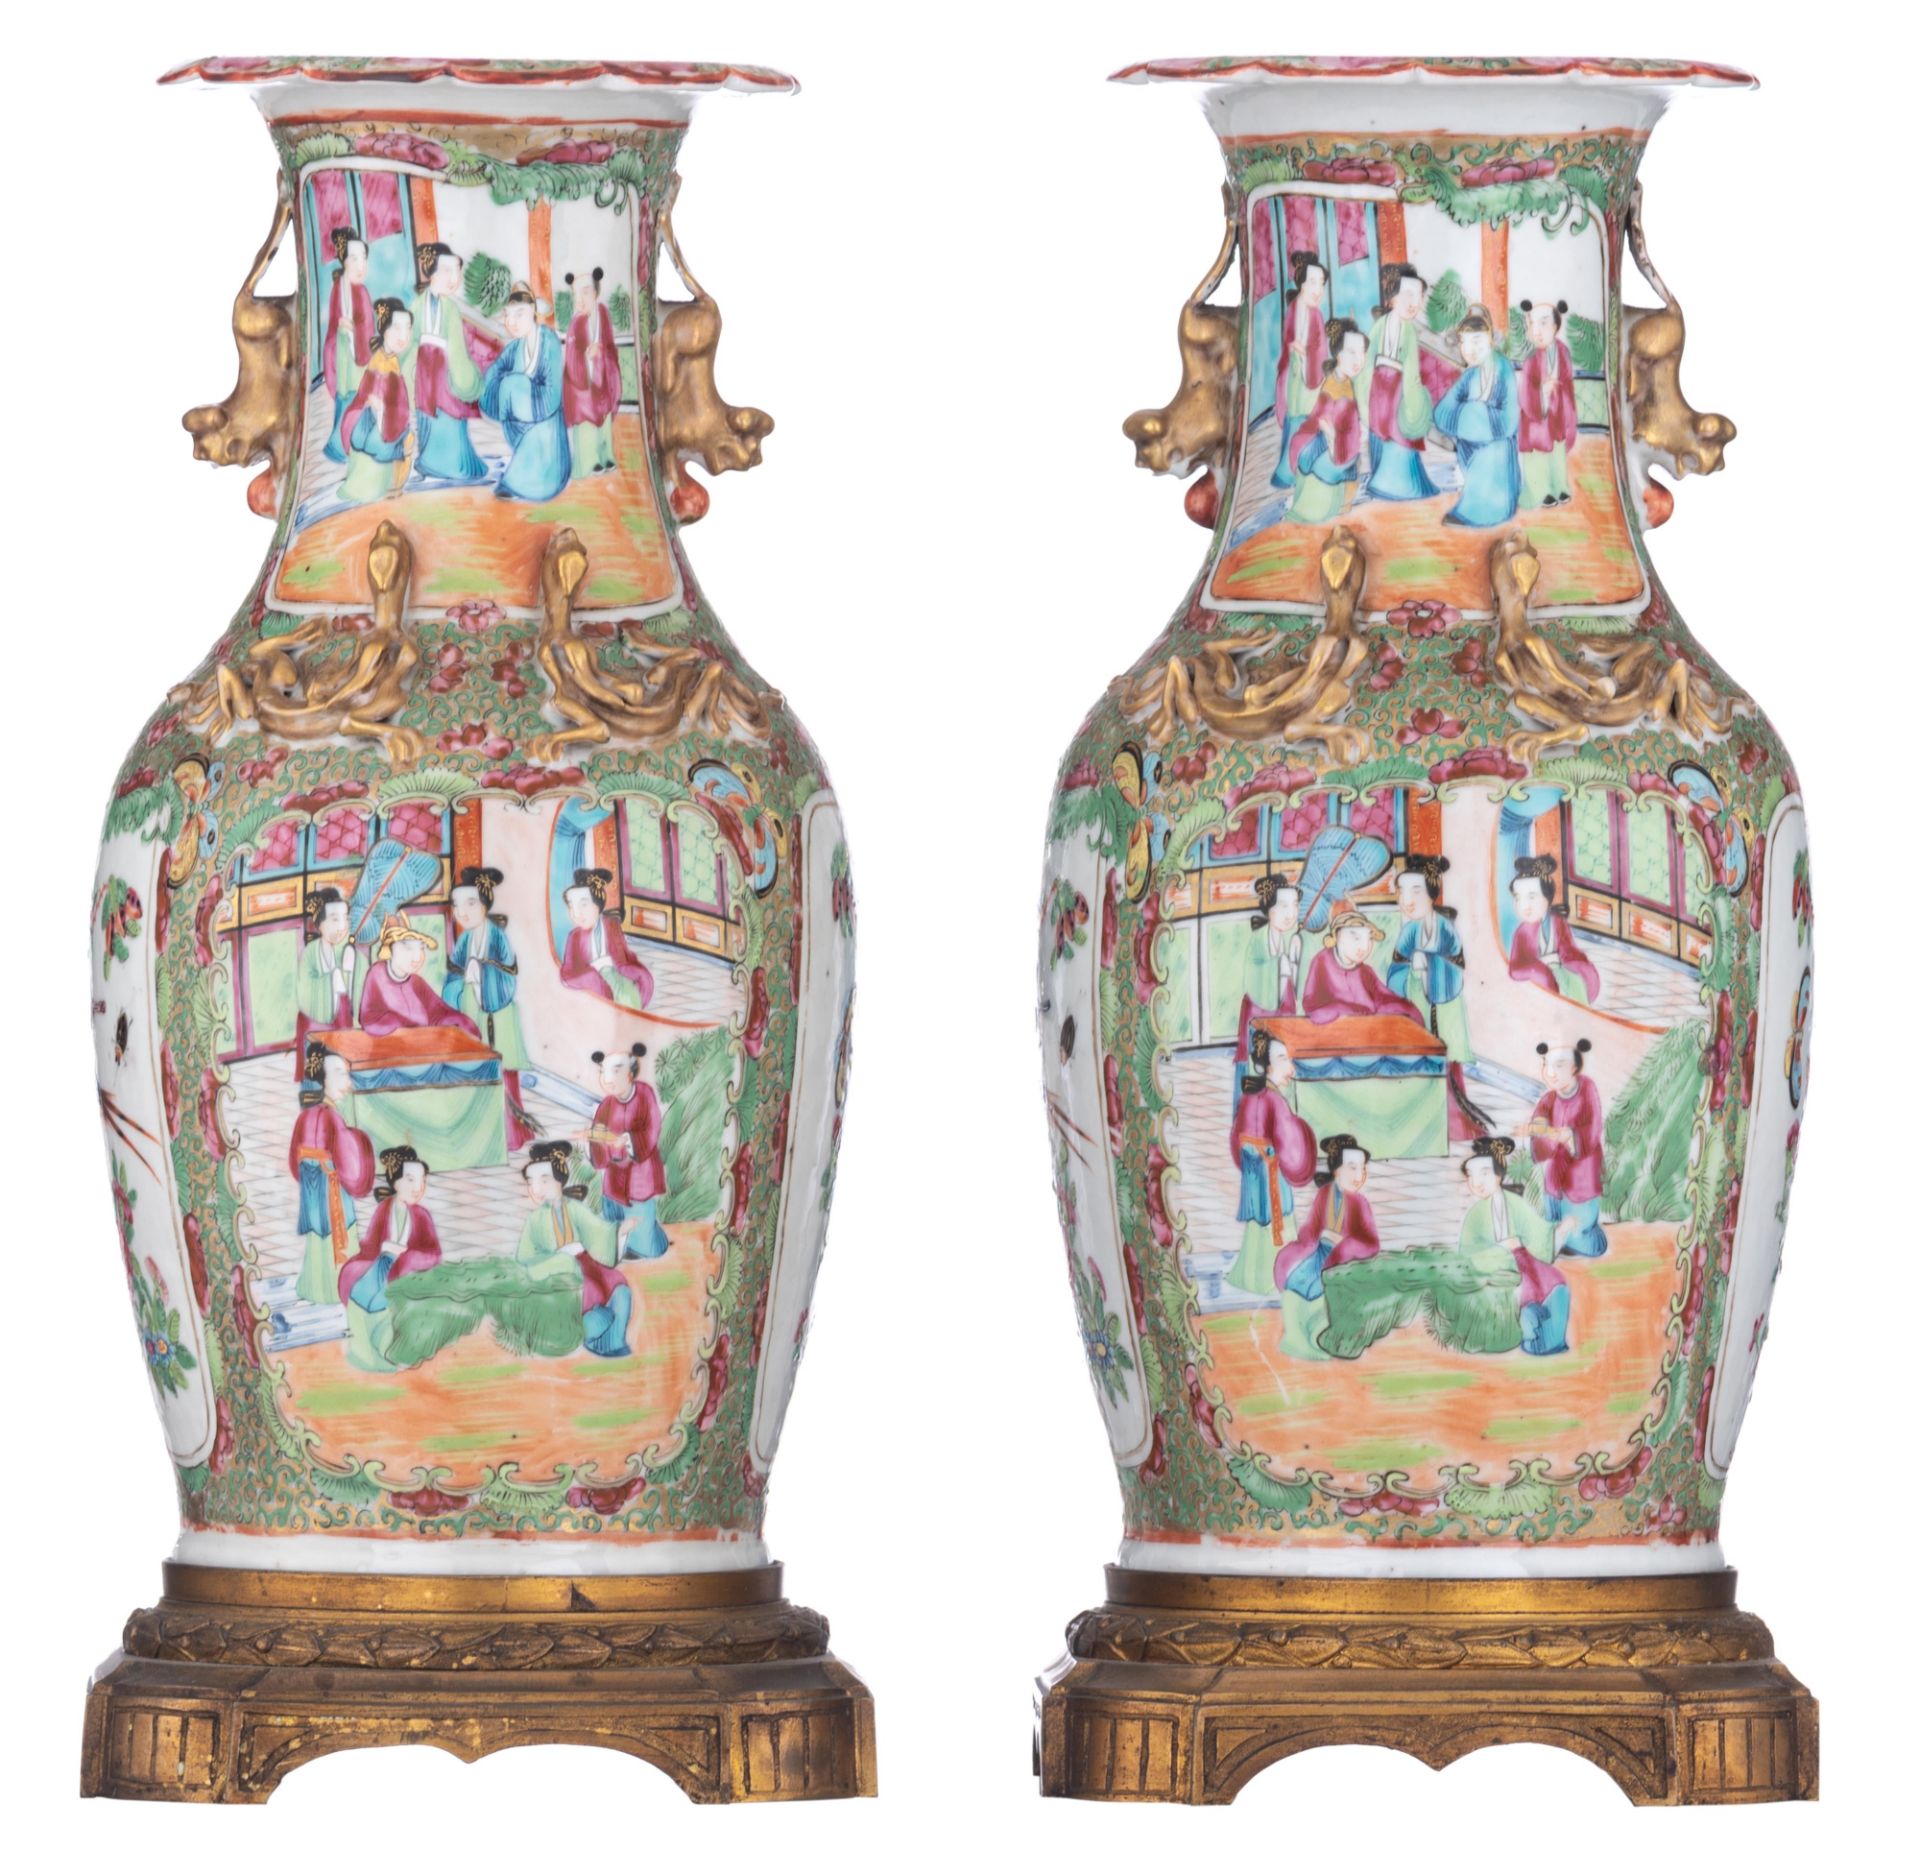 A pair of Chinese Canton vases, with fixed gilt bronze bottom mounts, 19thC, total H 41 cm